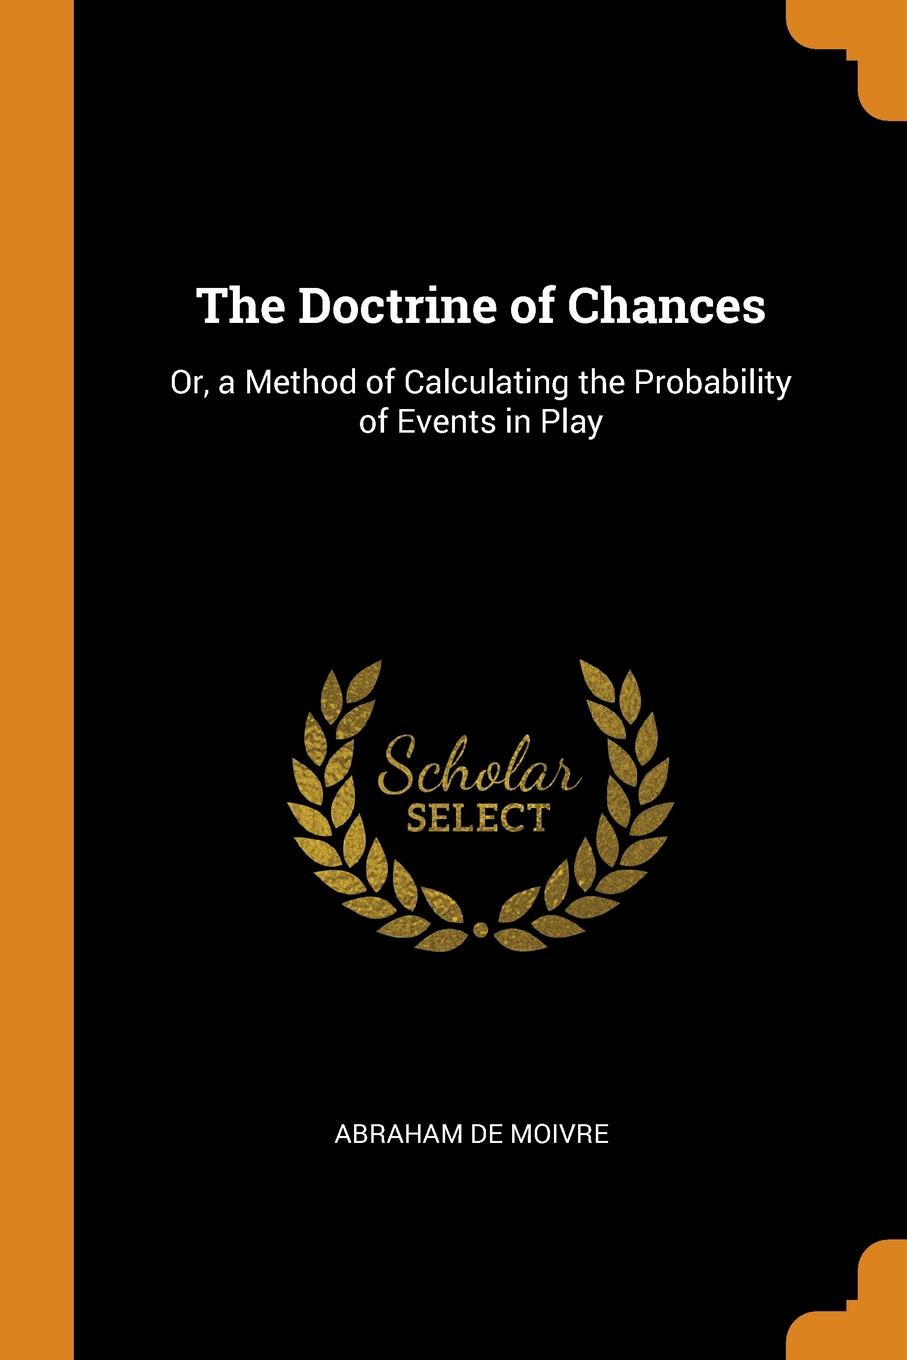 The Doctrine of Chances. Or, a Method of Calculating the Probability of Events in Play